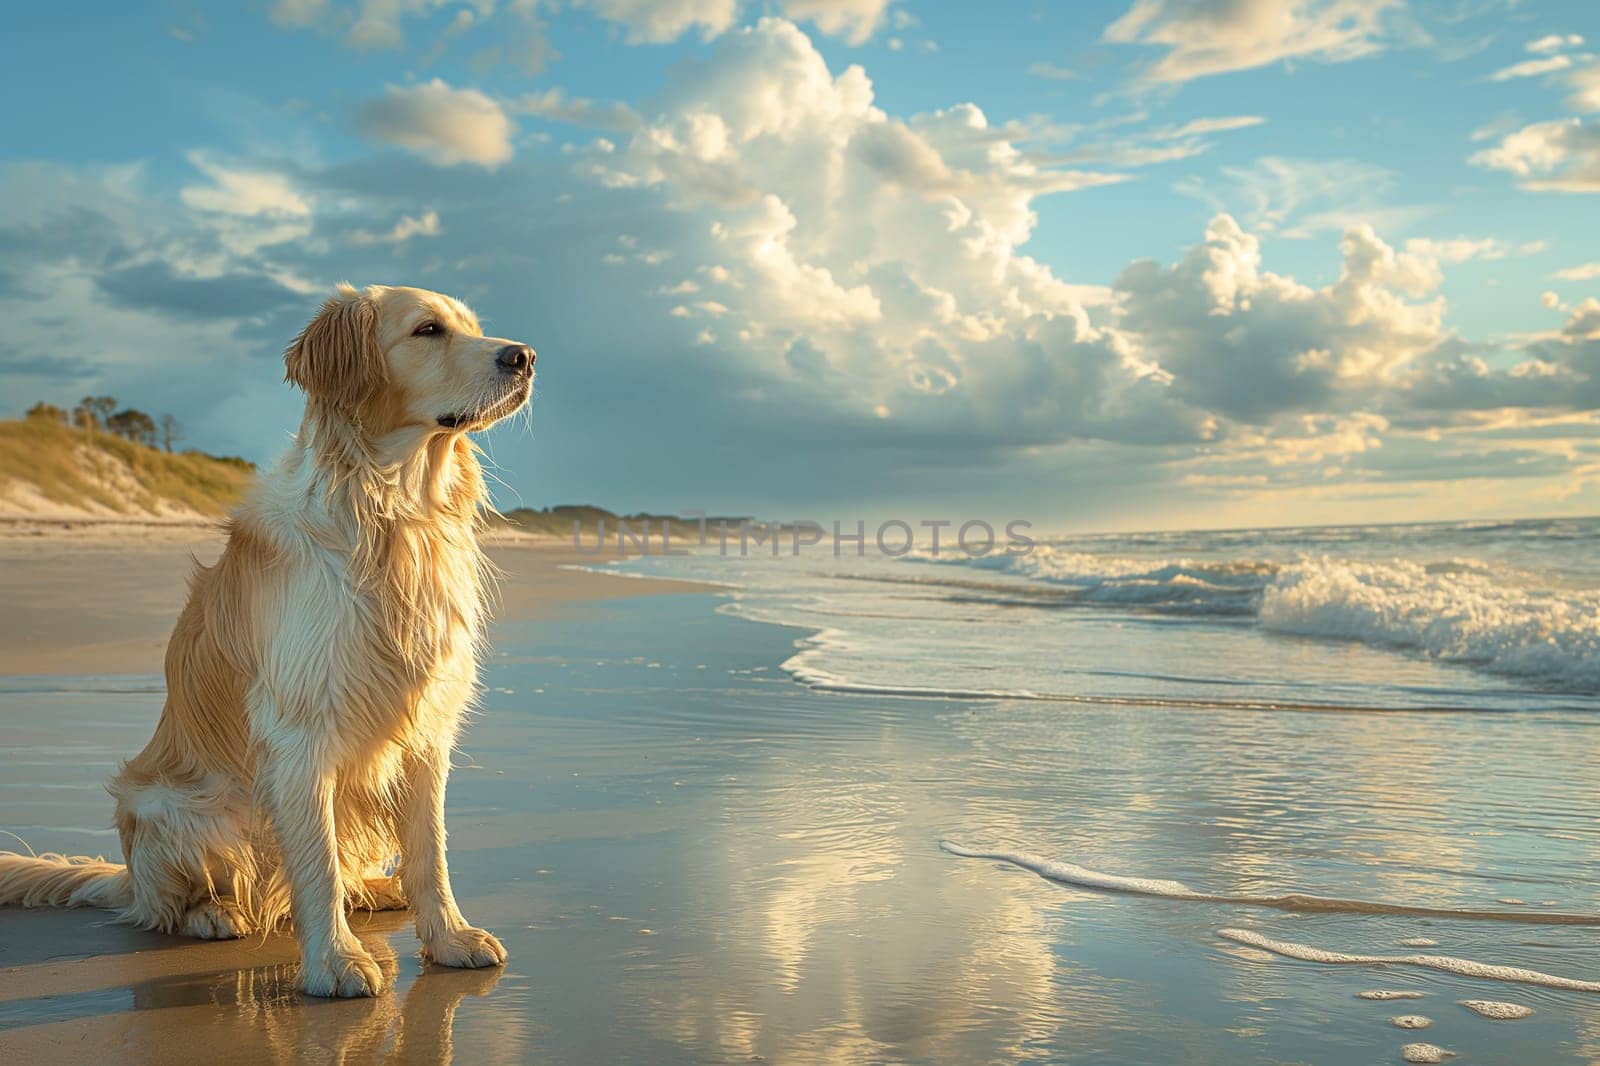 Happy golden retriever on the beach looking at the sea